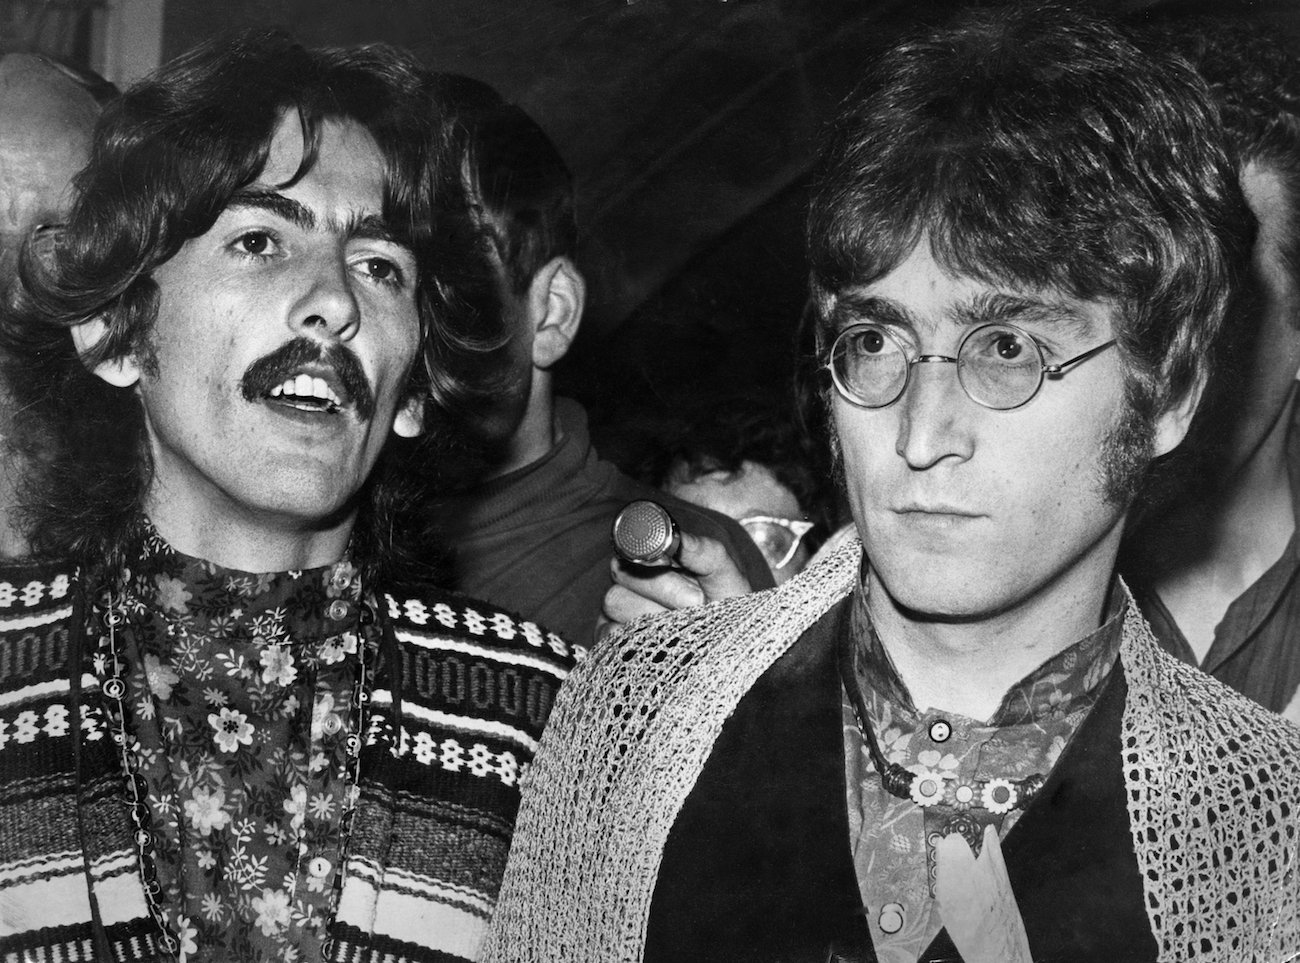 George Harrison and John Lennon at the train station in 1967.